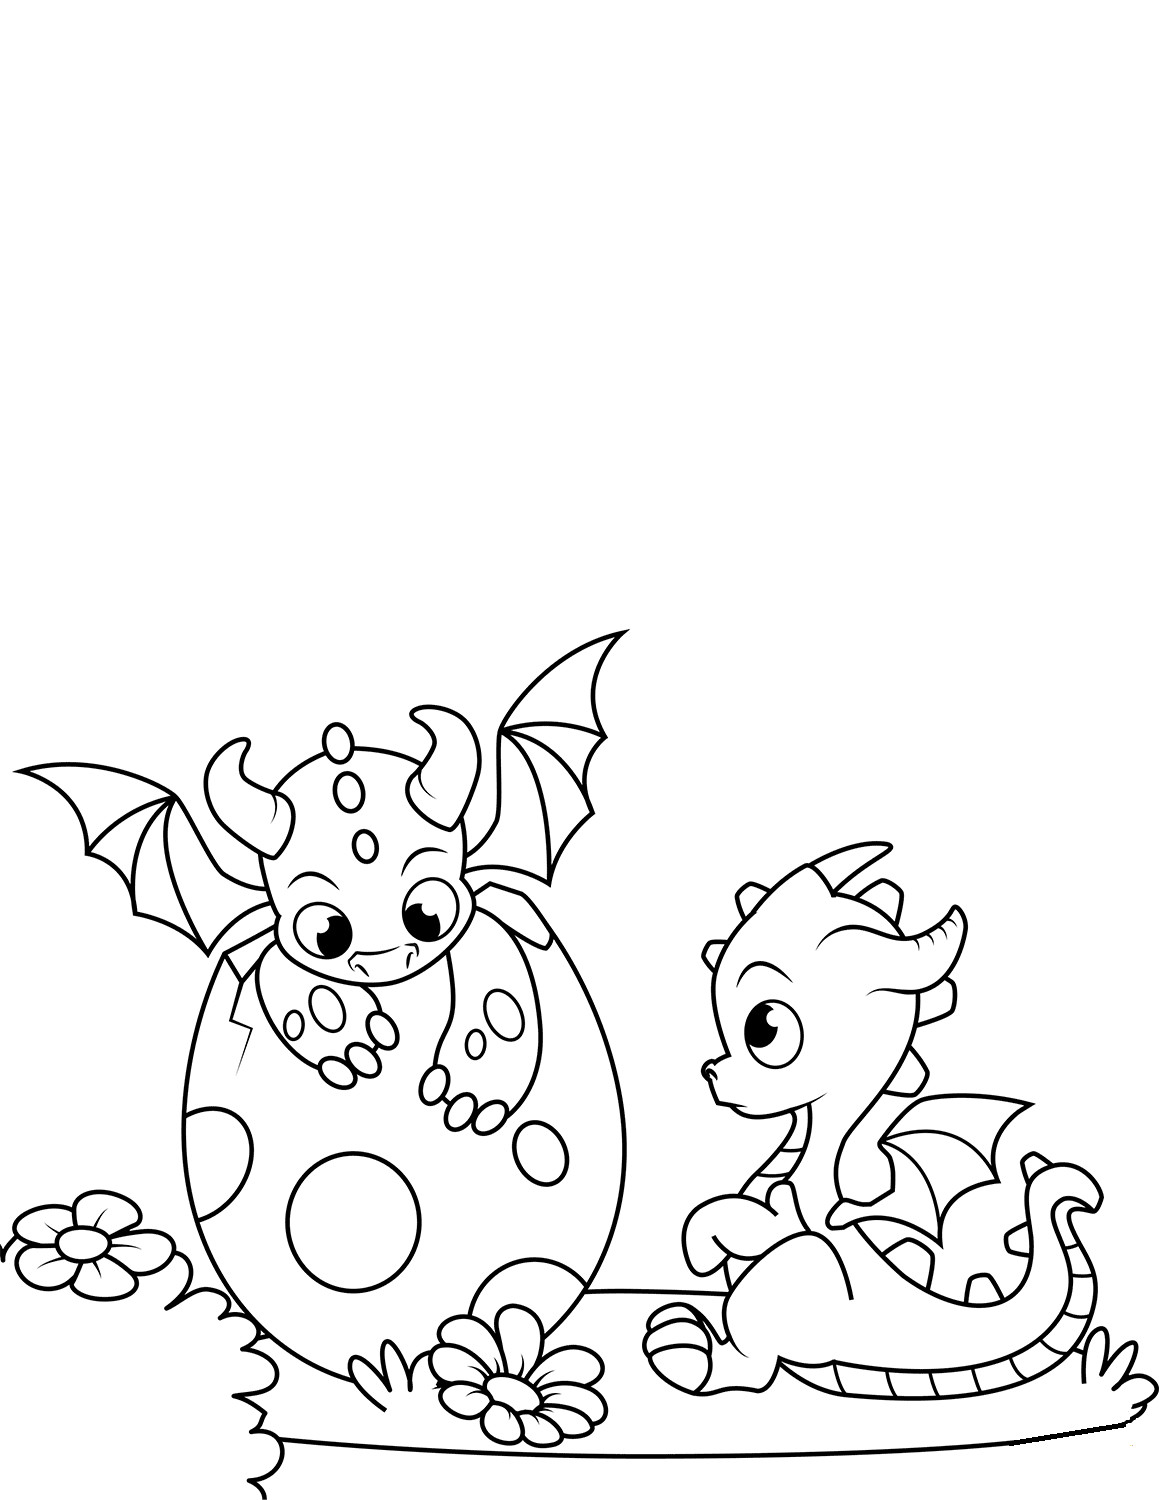 Cute Baby Dragon Coloring Pages
 35 Free Printable Dragon Coloring Pages